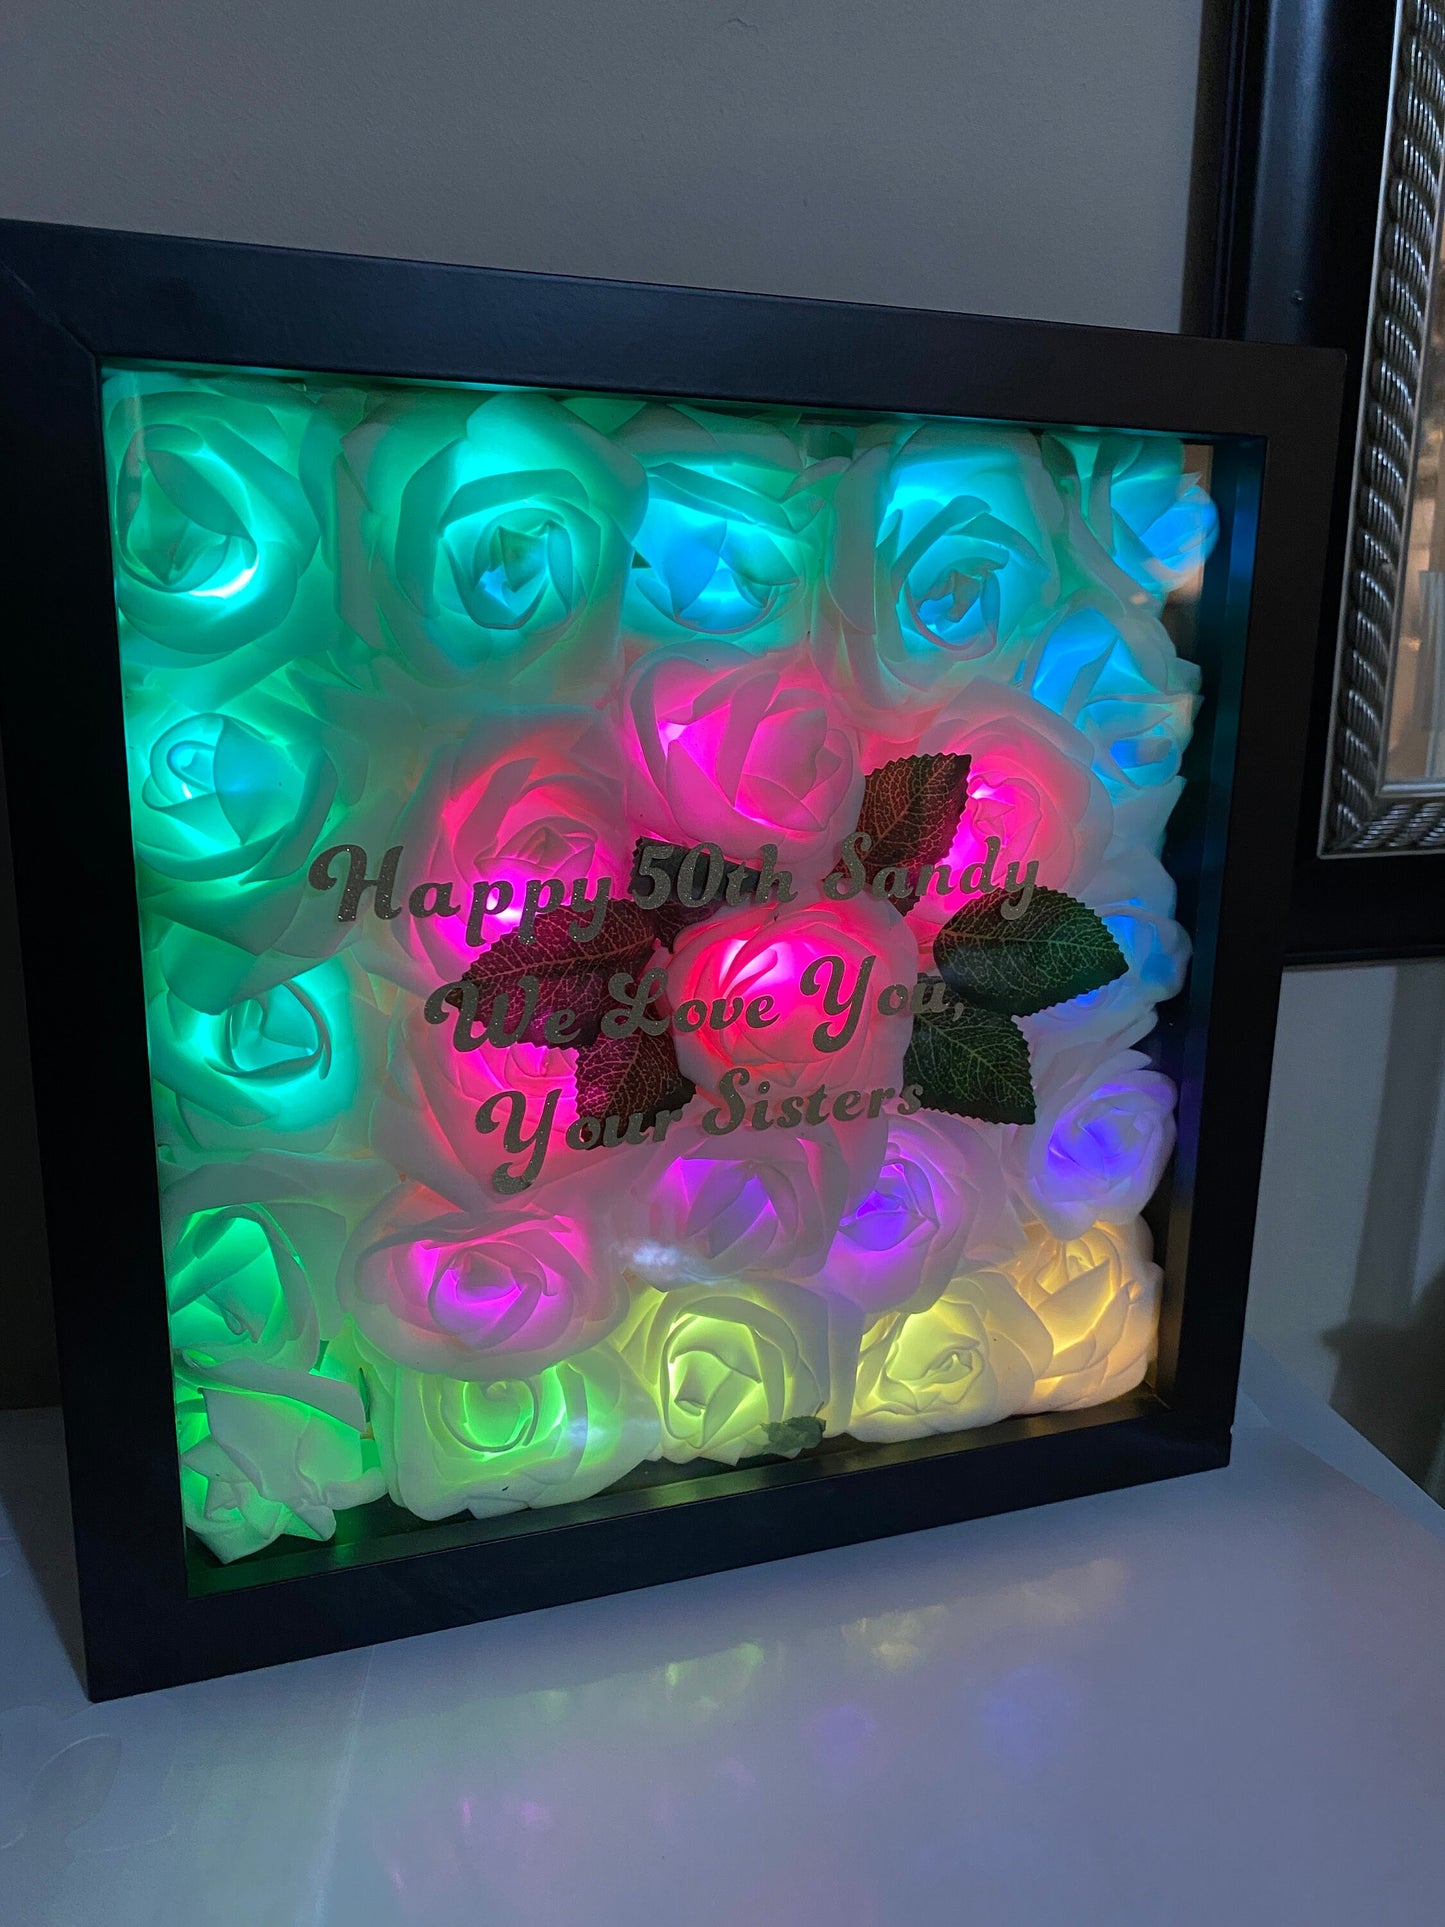 Flower Shadow Box Personalize Message, Bedsids Table Lamp, Desk Lamp, Night Light